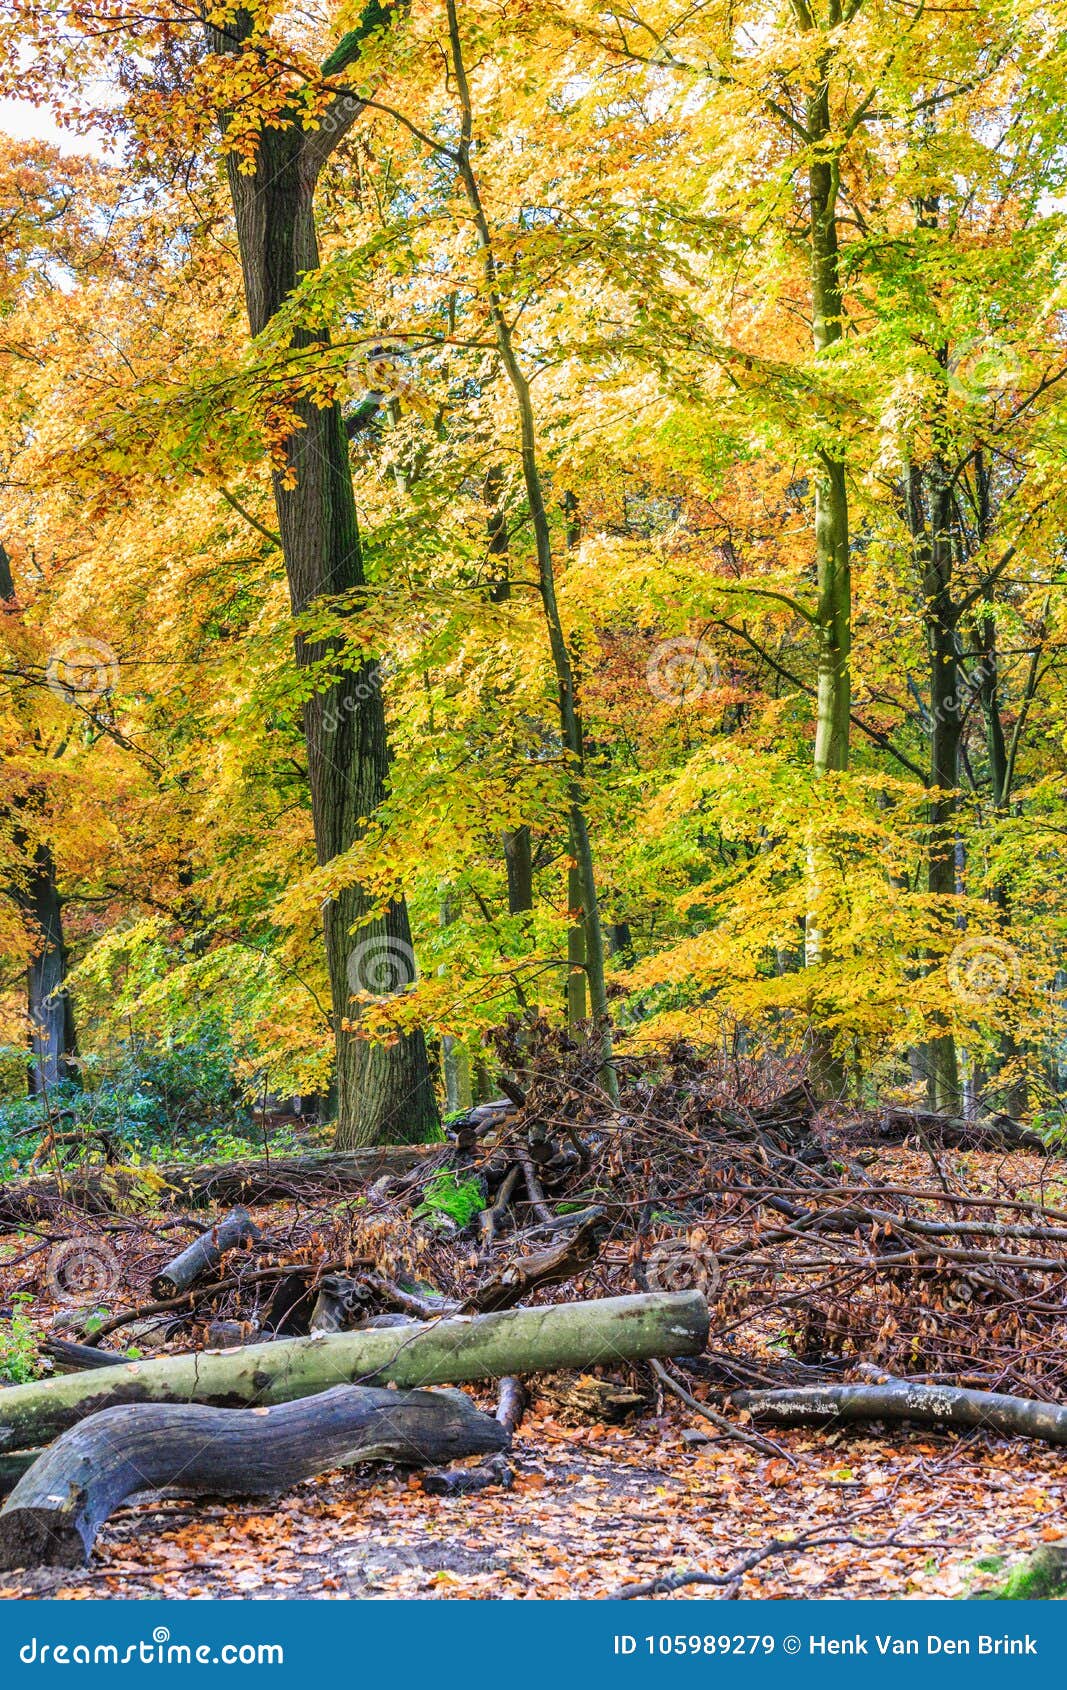 Beech Trees With Leaf In Autumn Color In Natural Forest Stock Image